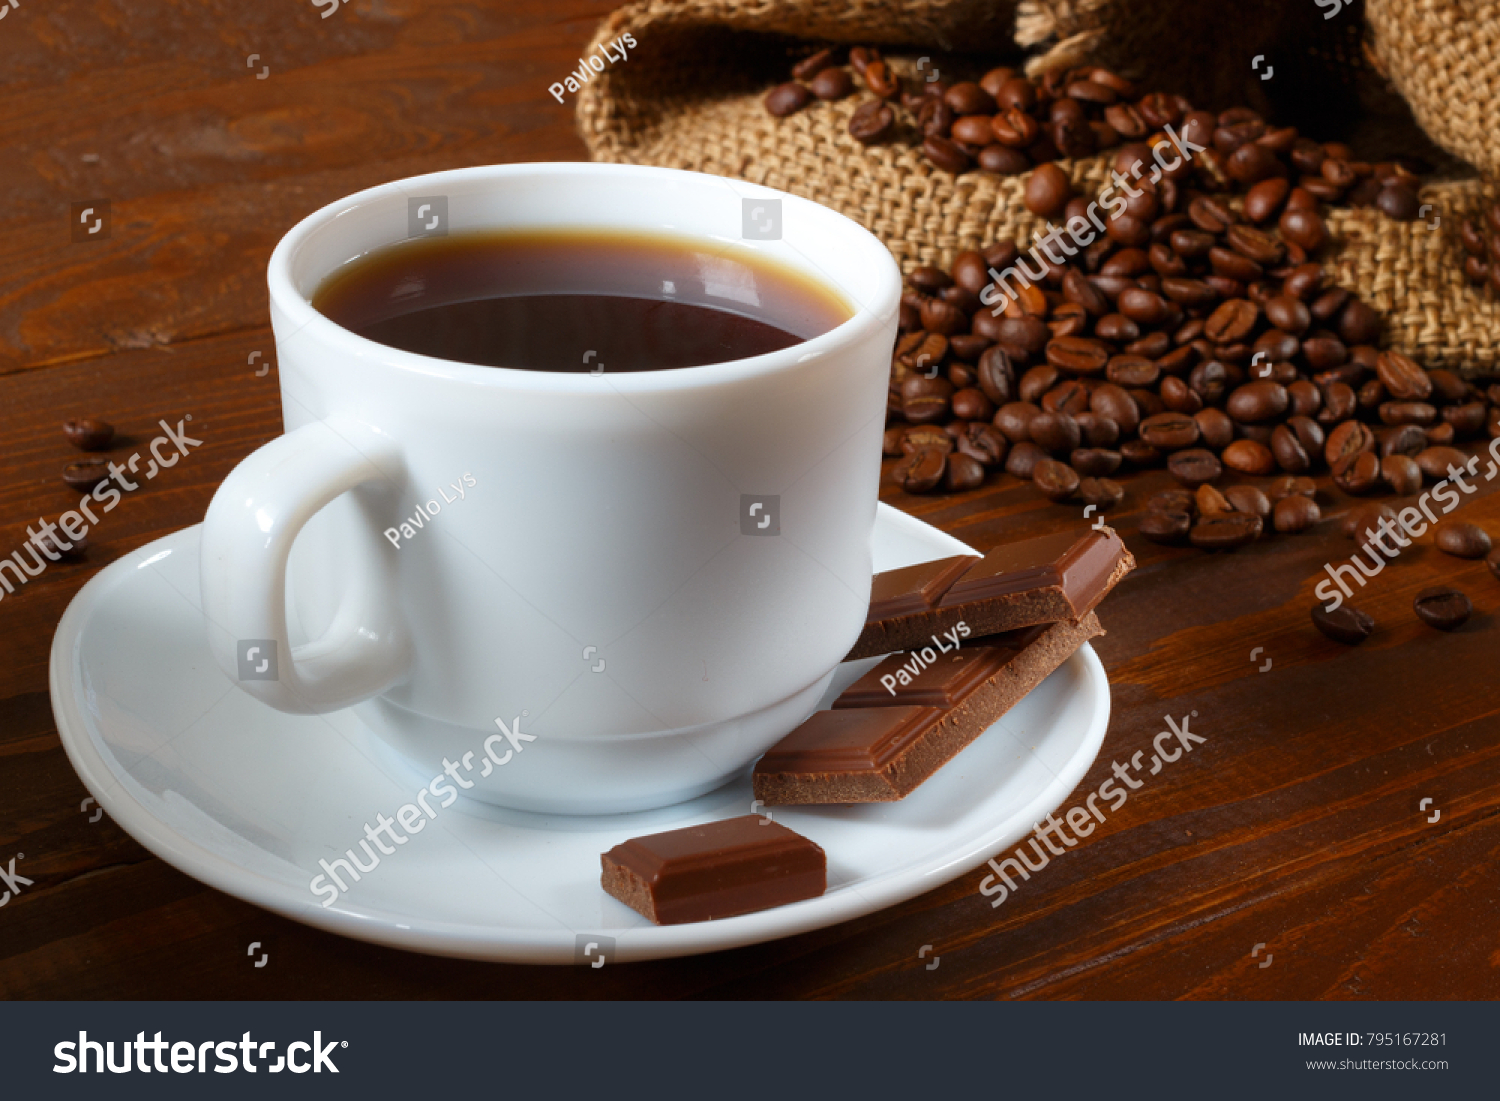 A white pitcher, coffee beans, chocolate and a coffee bag with a wooden background #795167281